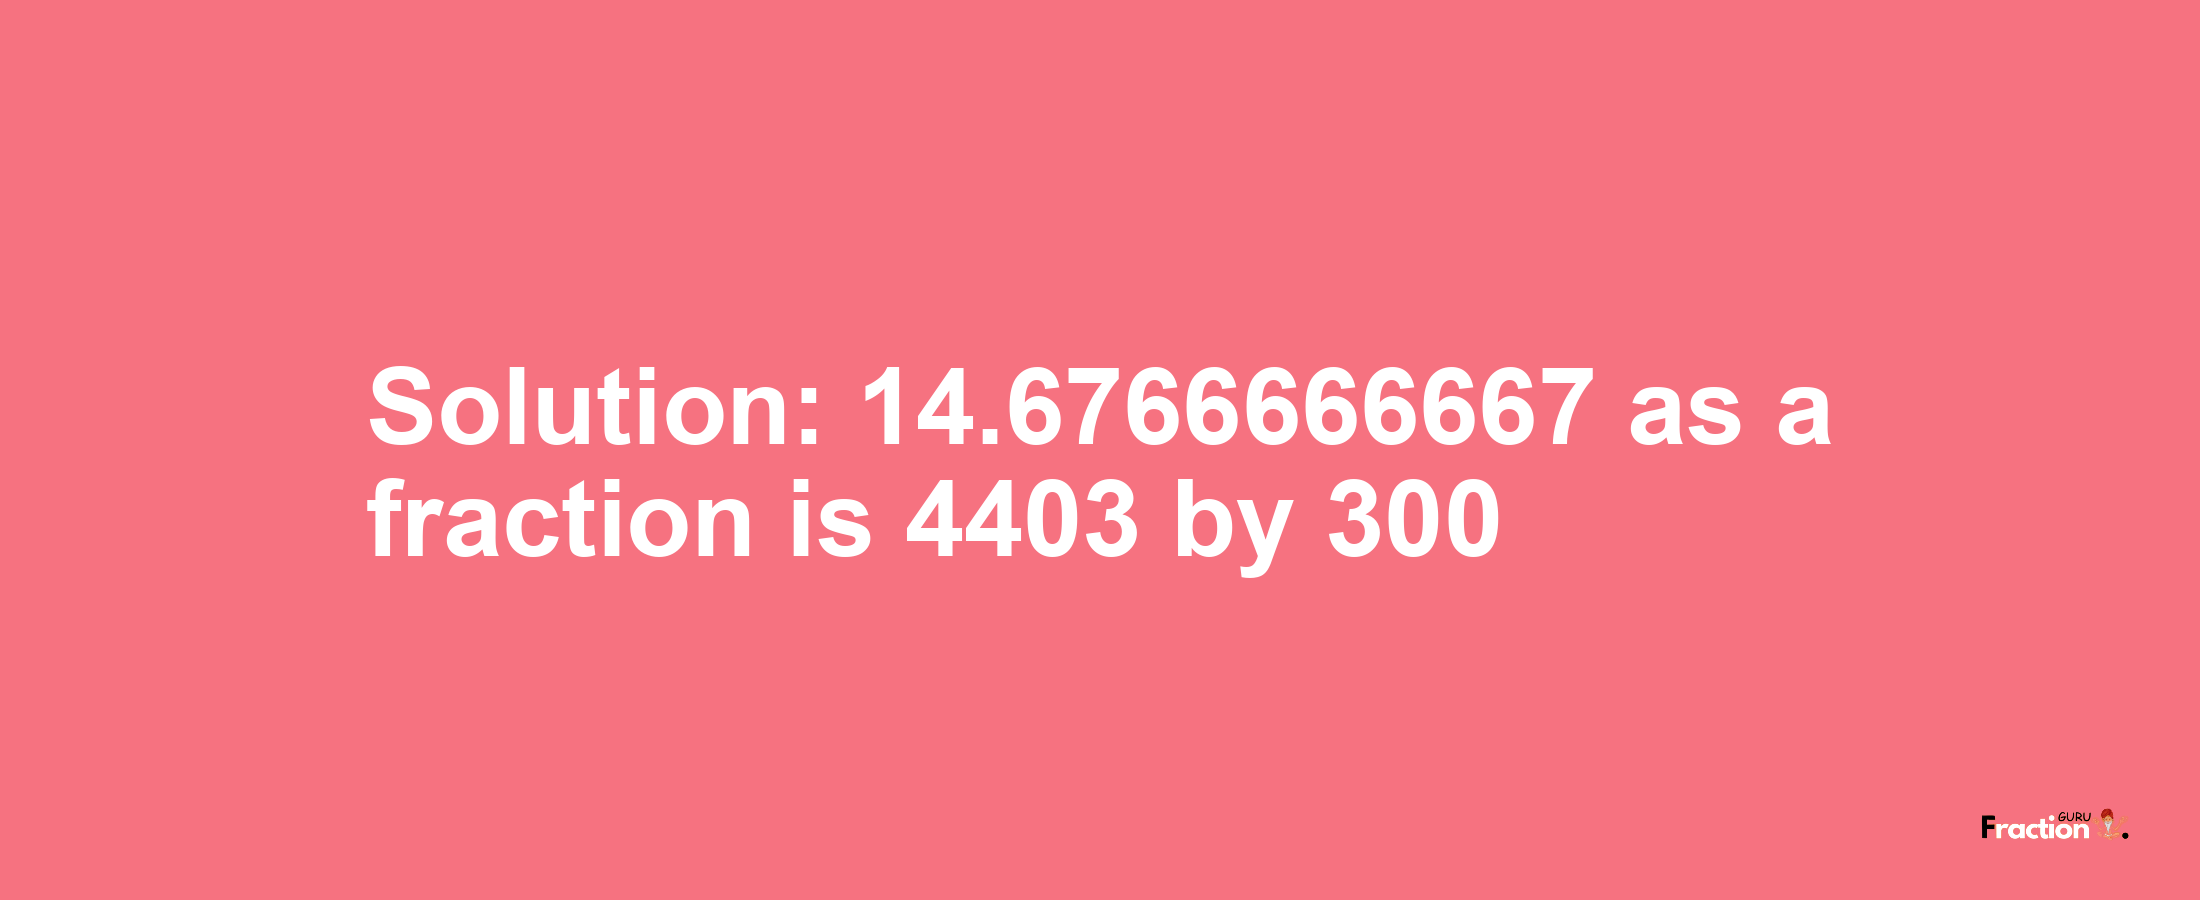 Solution:14.6766666667 as a fraction is 4403/300